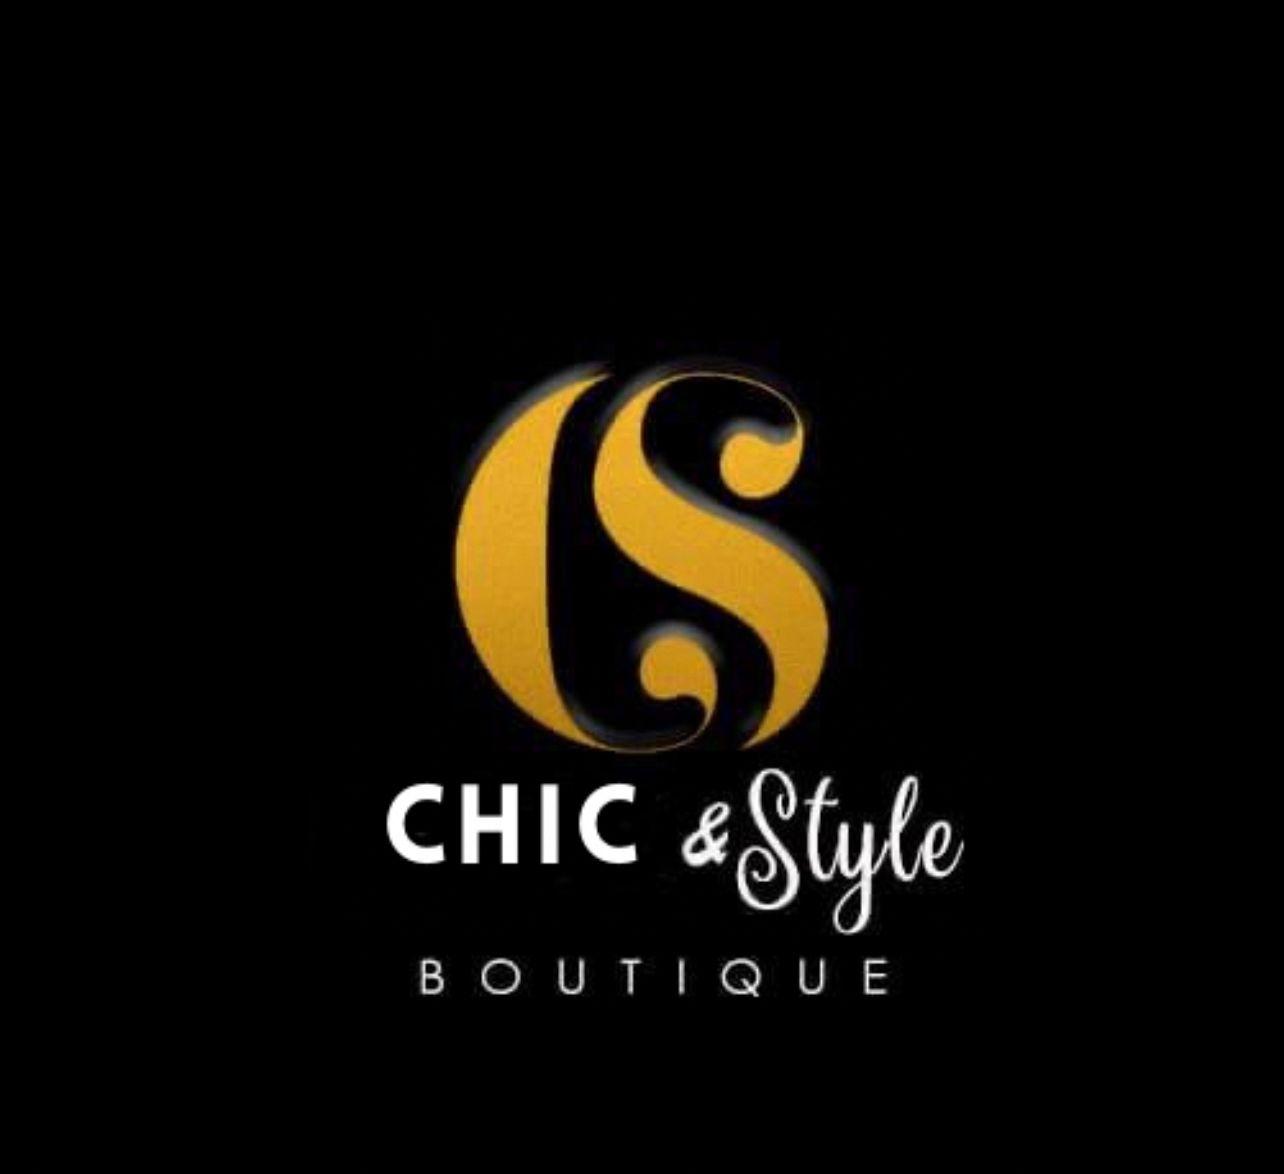 ‘Chic & Style Boutique’ – for affordable high-end apparel, footwear ...